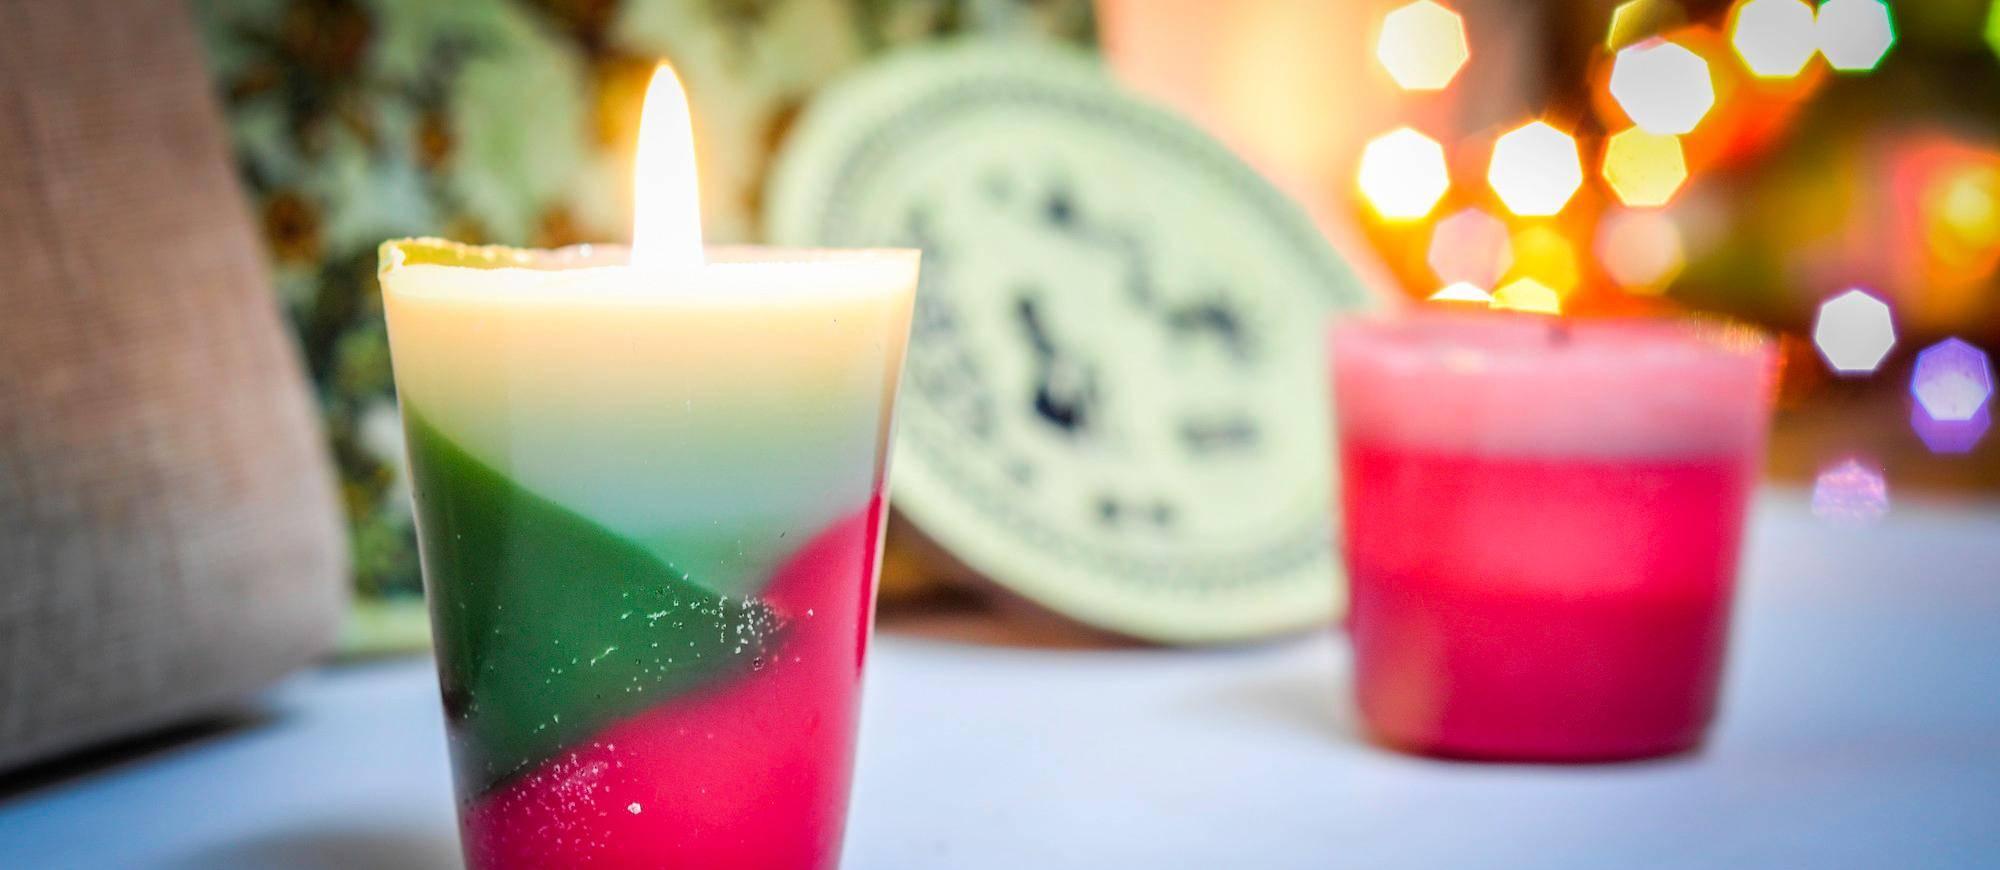 Why Join Scented Candle Making Workshop Singapore